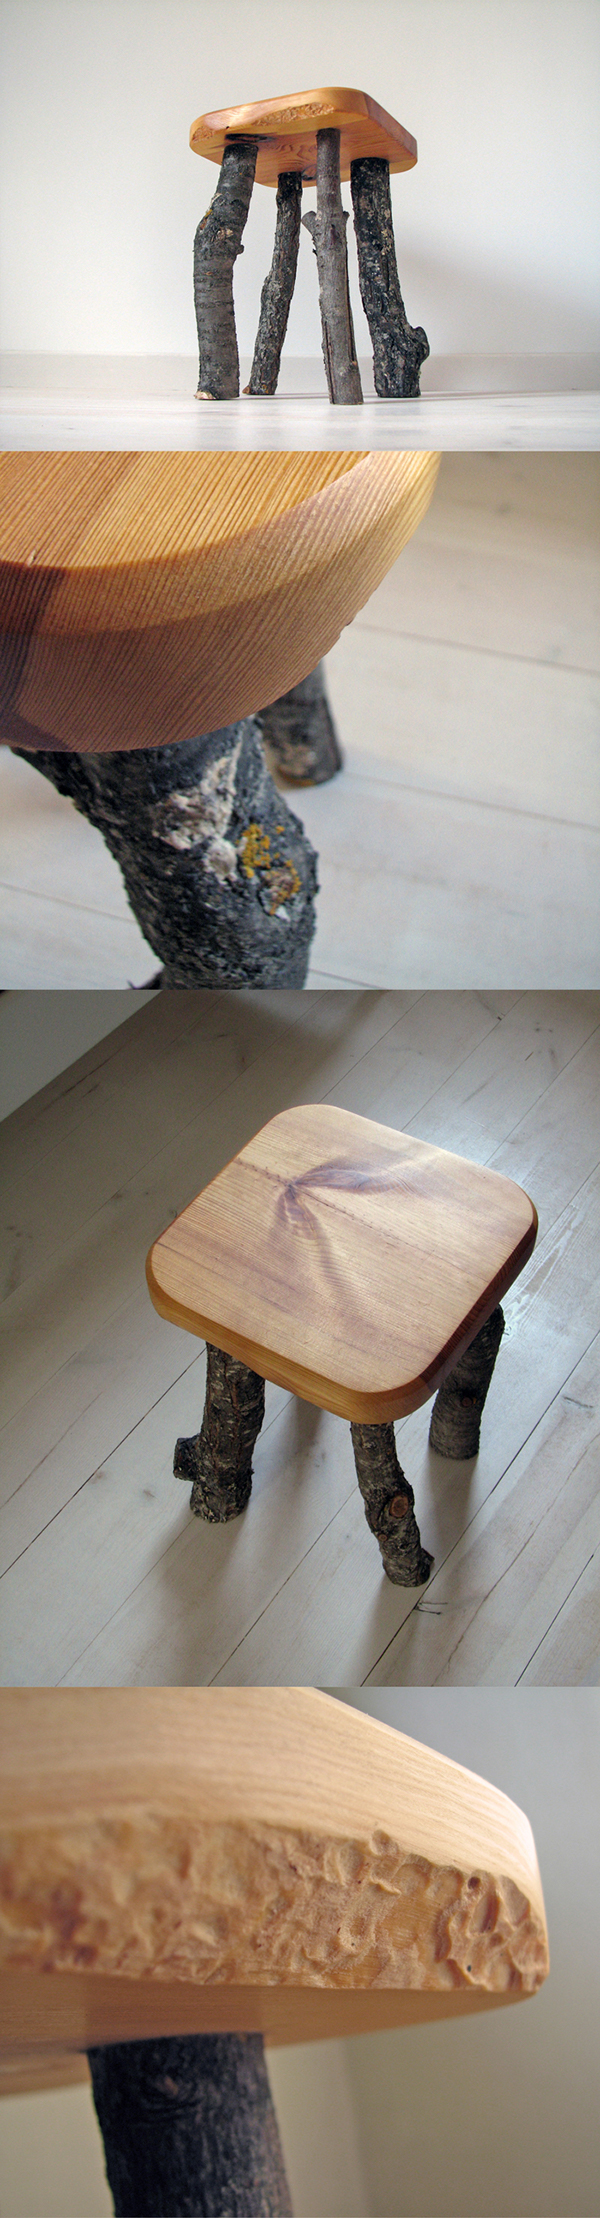 Tree   eco   recycle  pine  plum   sitting  Lithuania  DIY  Raw  natural  oiled  handmade  chair  bench